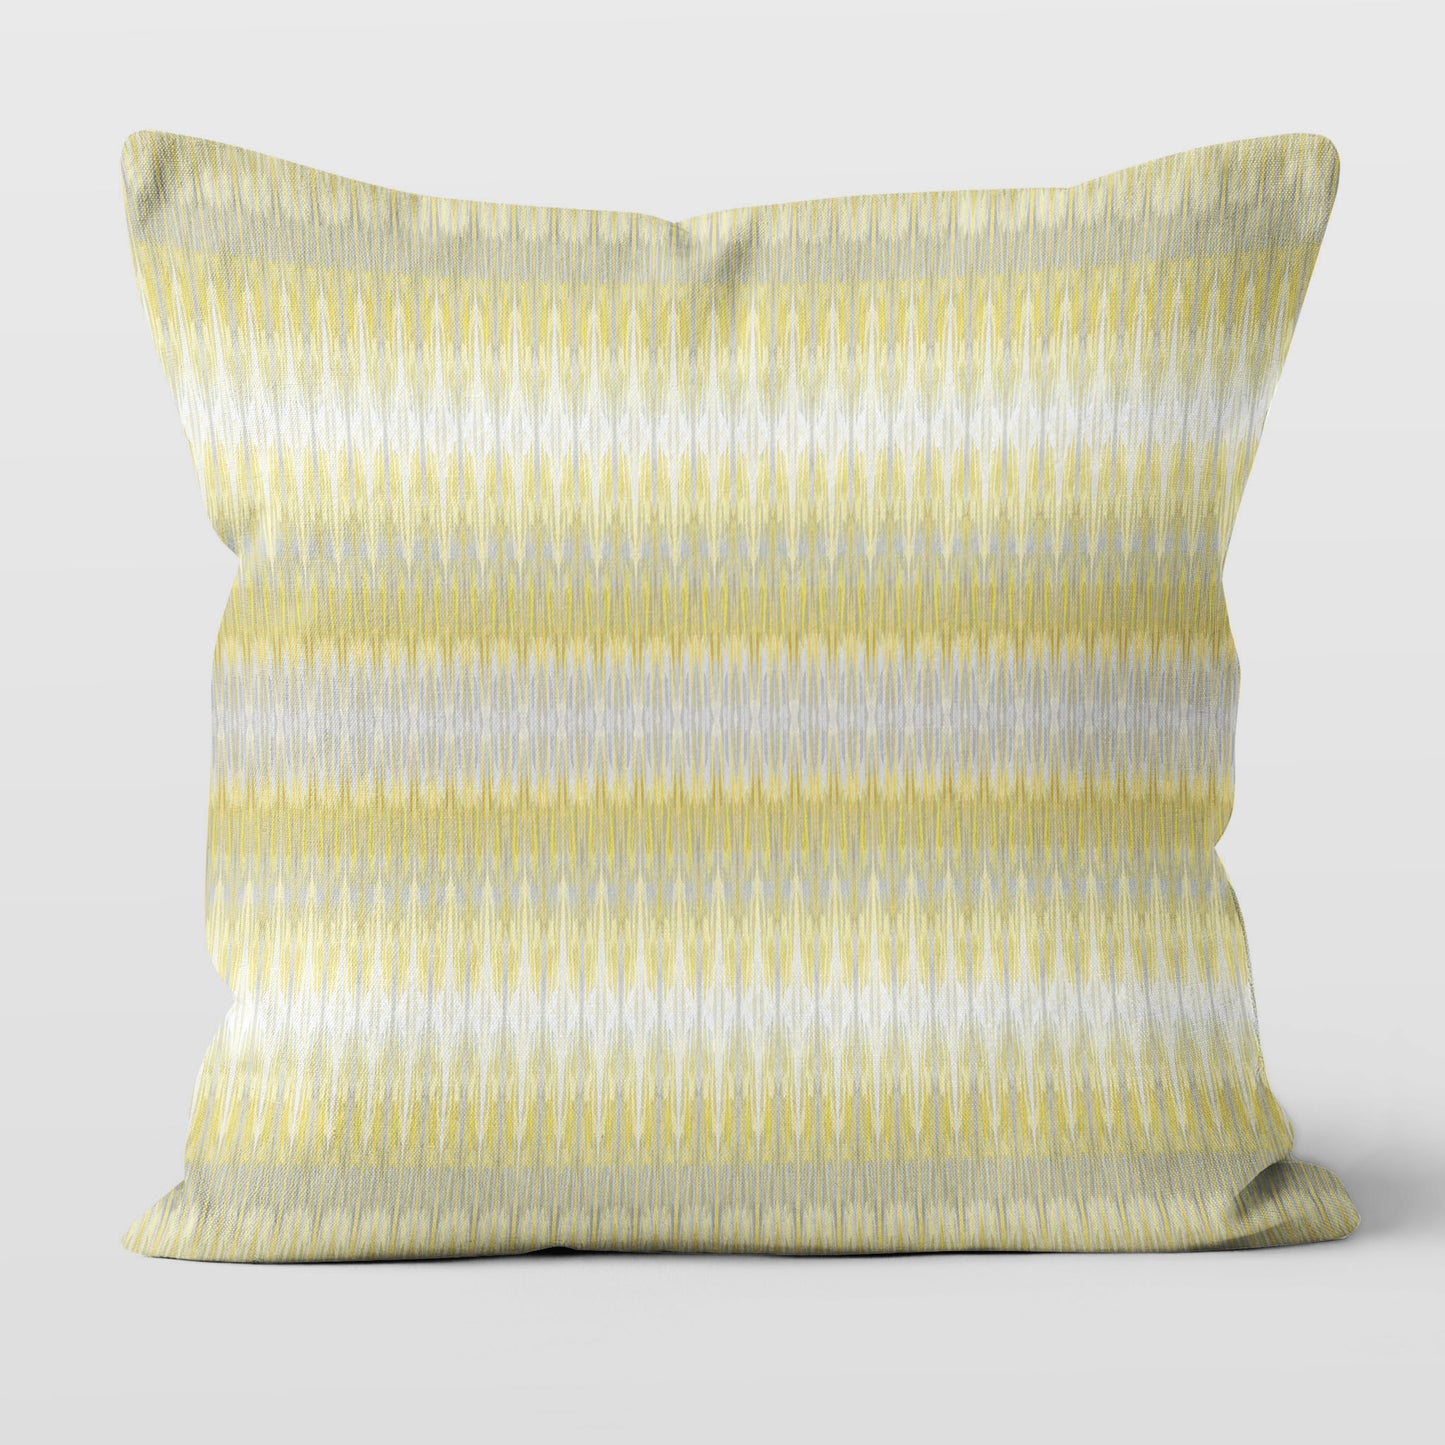 Square pillow featuring hand painted yellow and grey stripe.